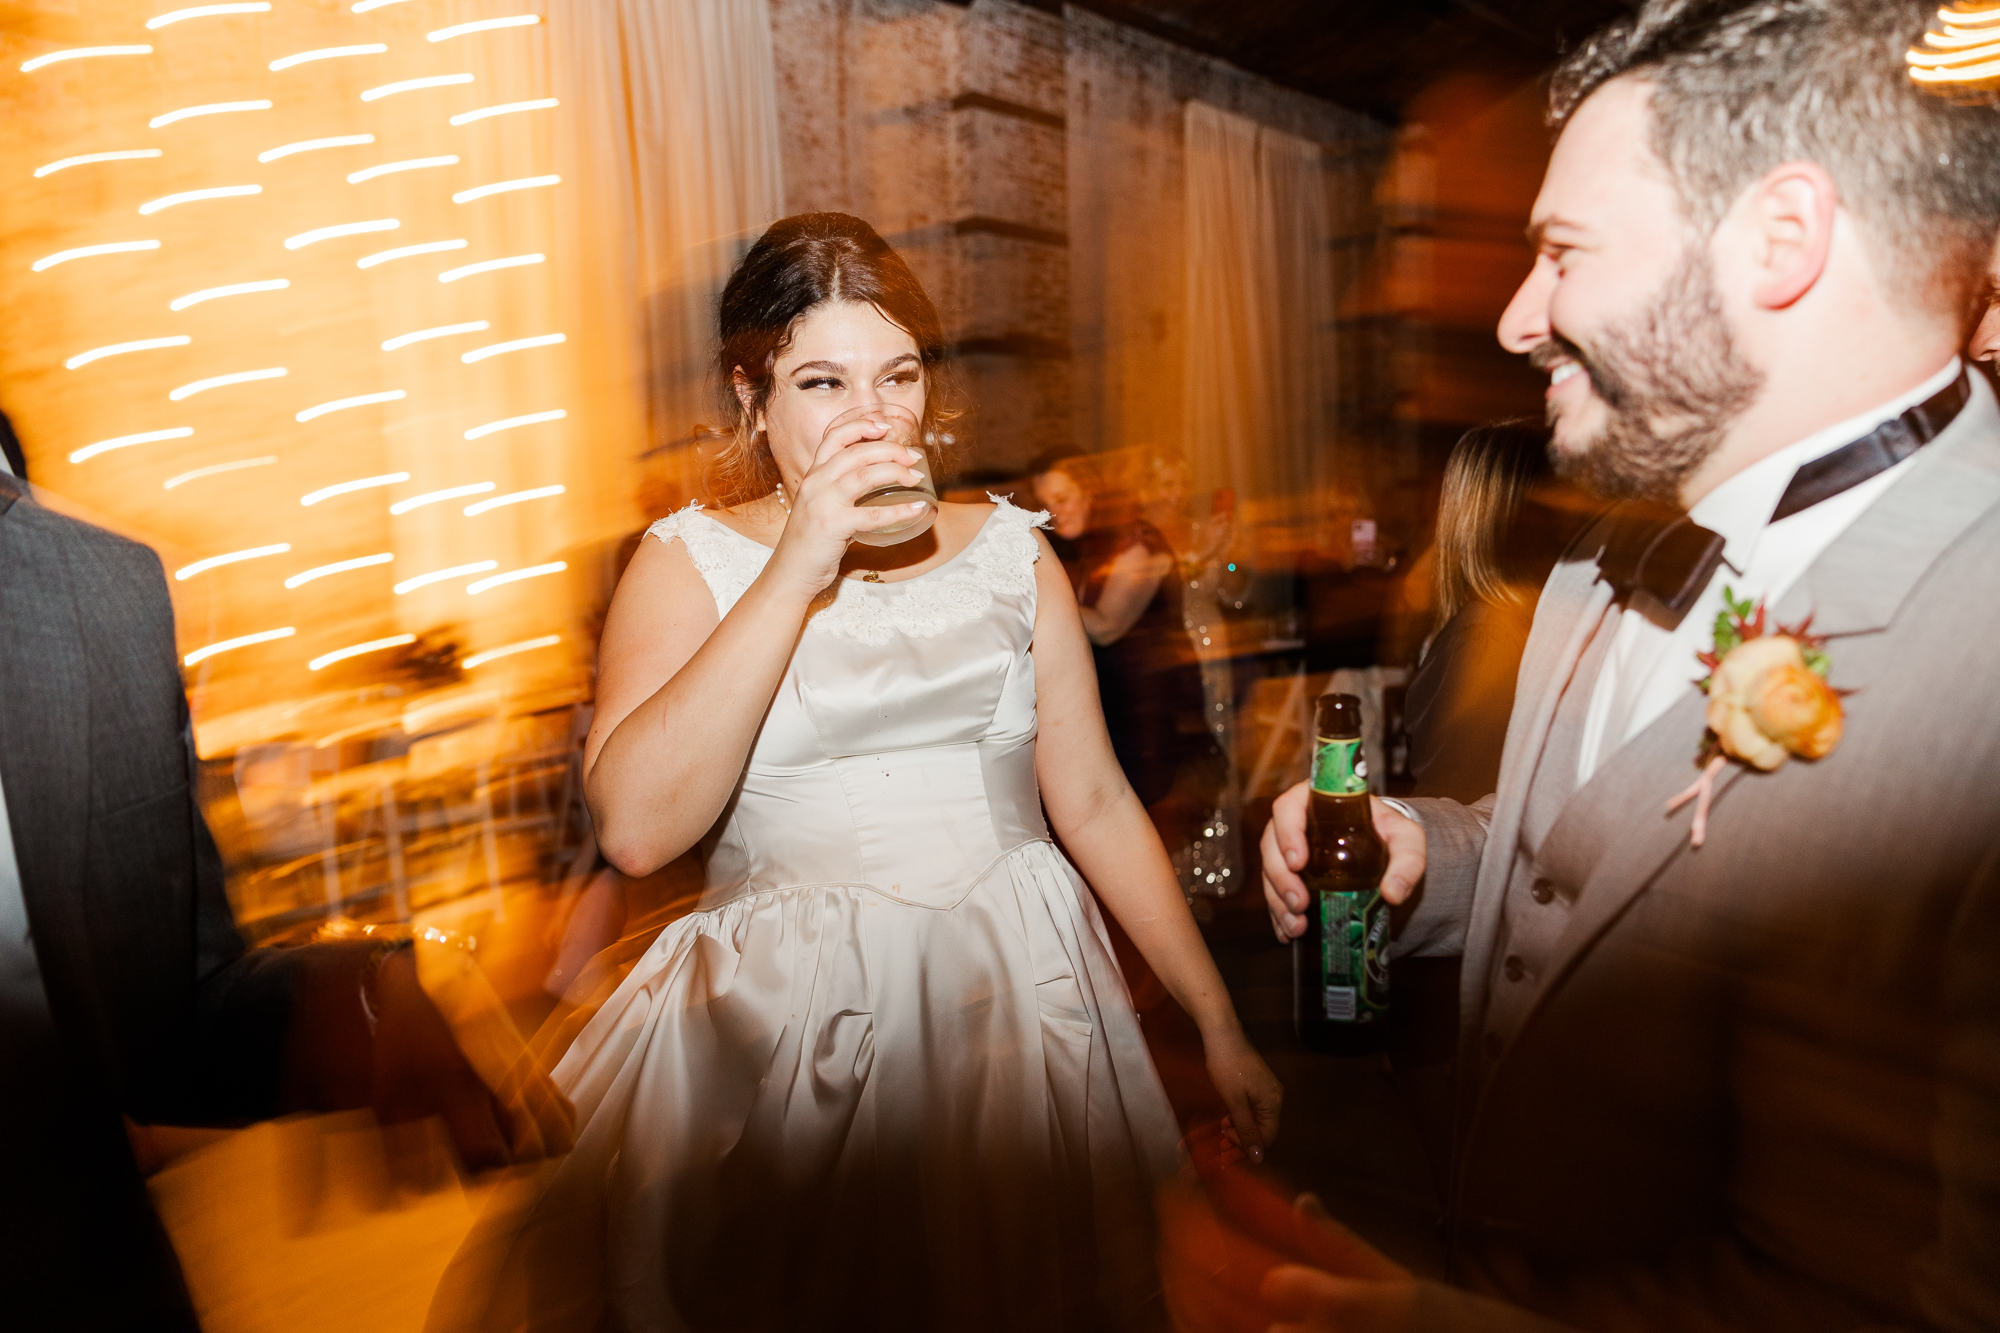 Candid Rainy New York Wedding Photos at The Green Building in Autumn